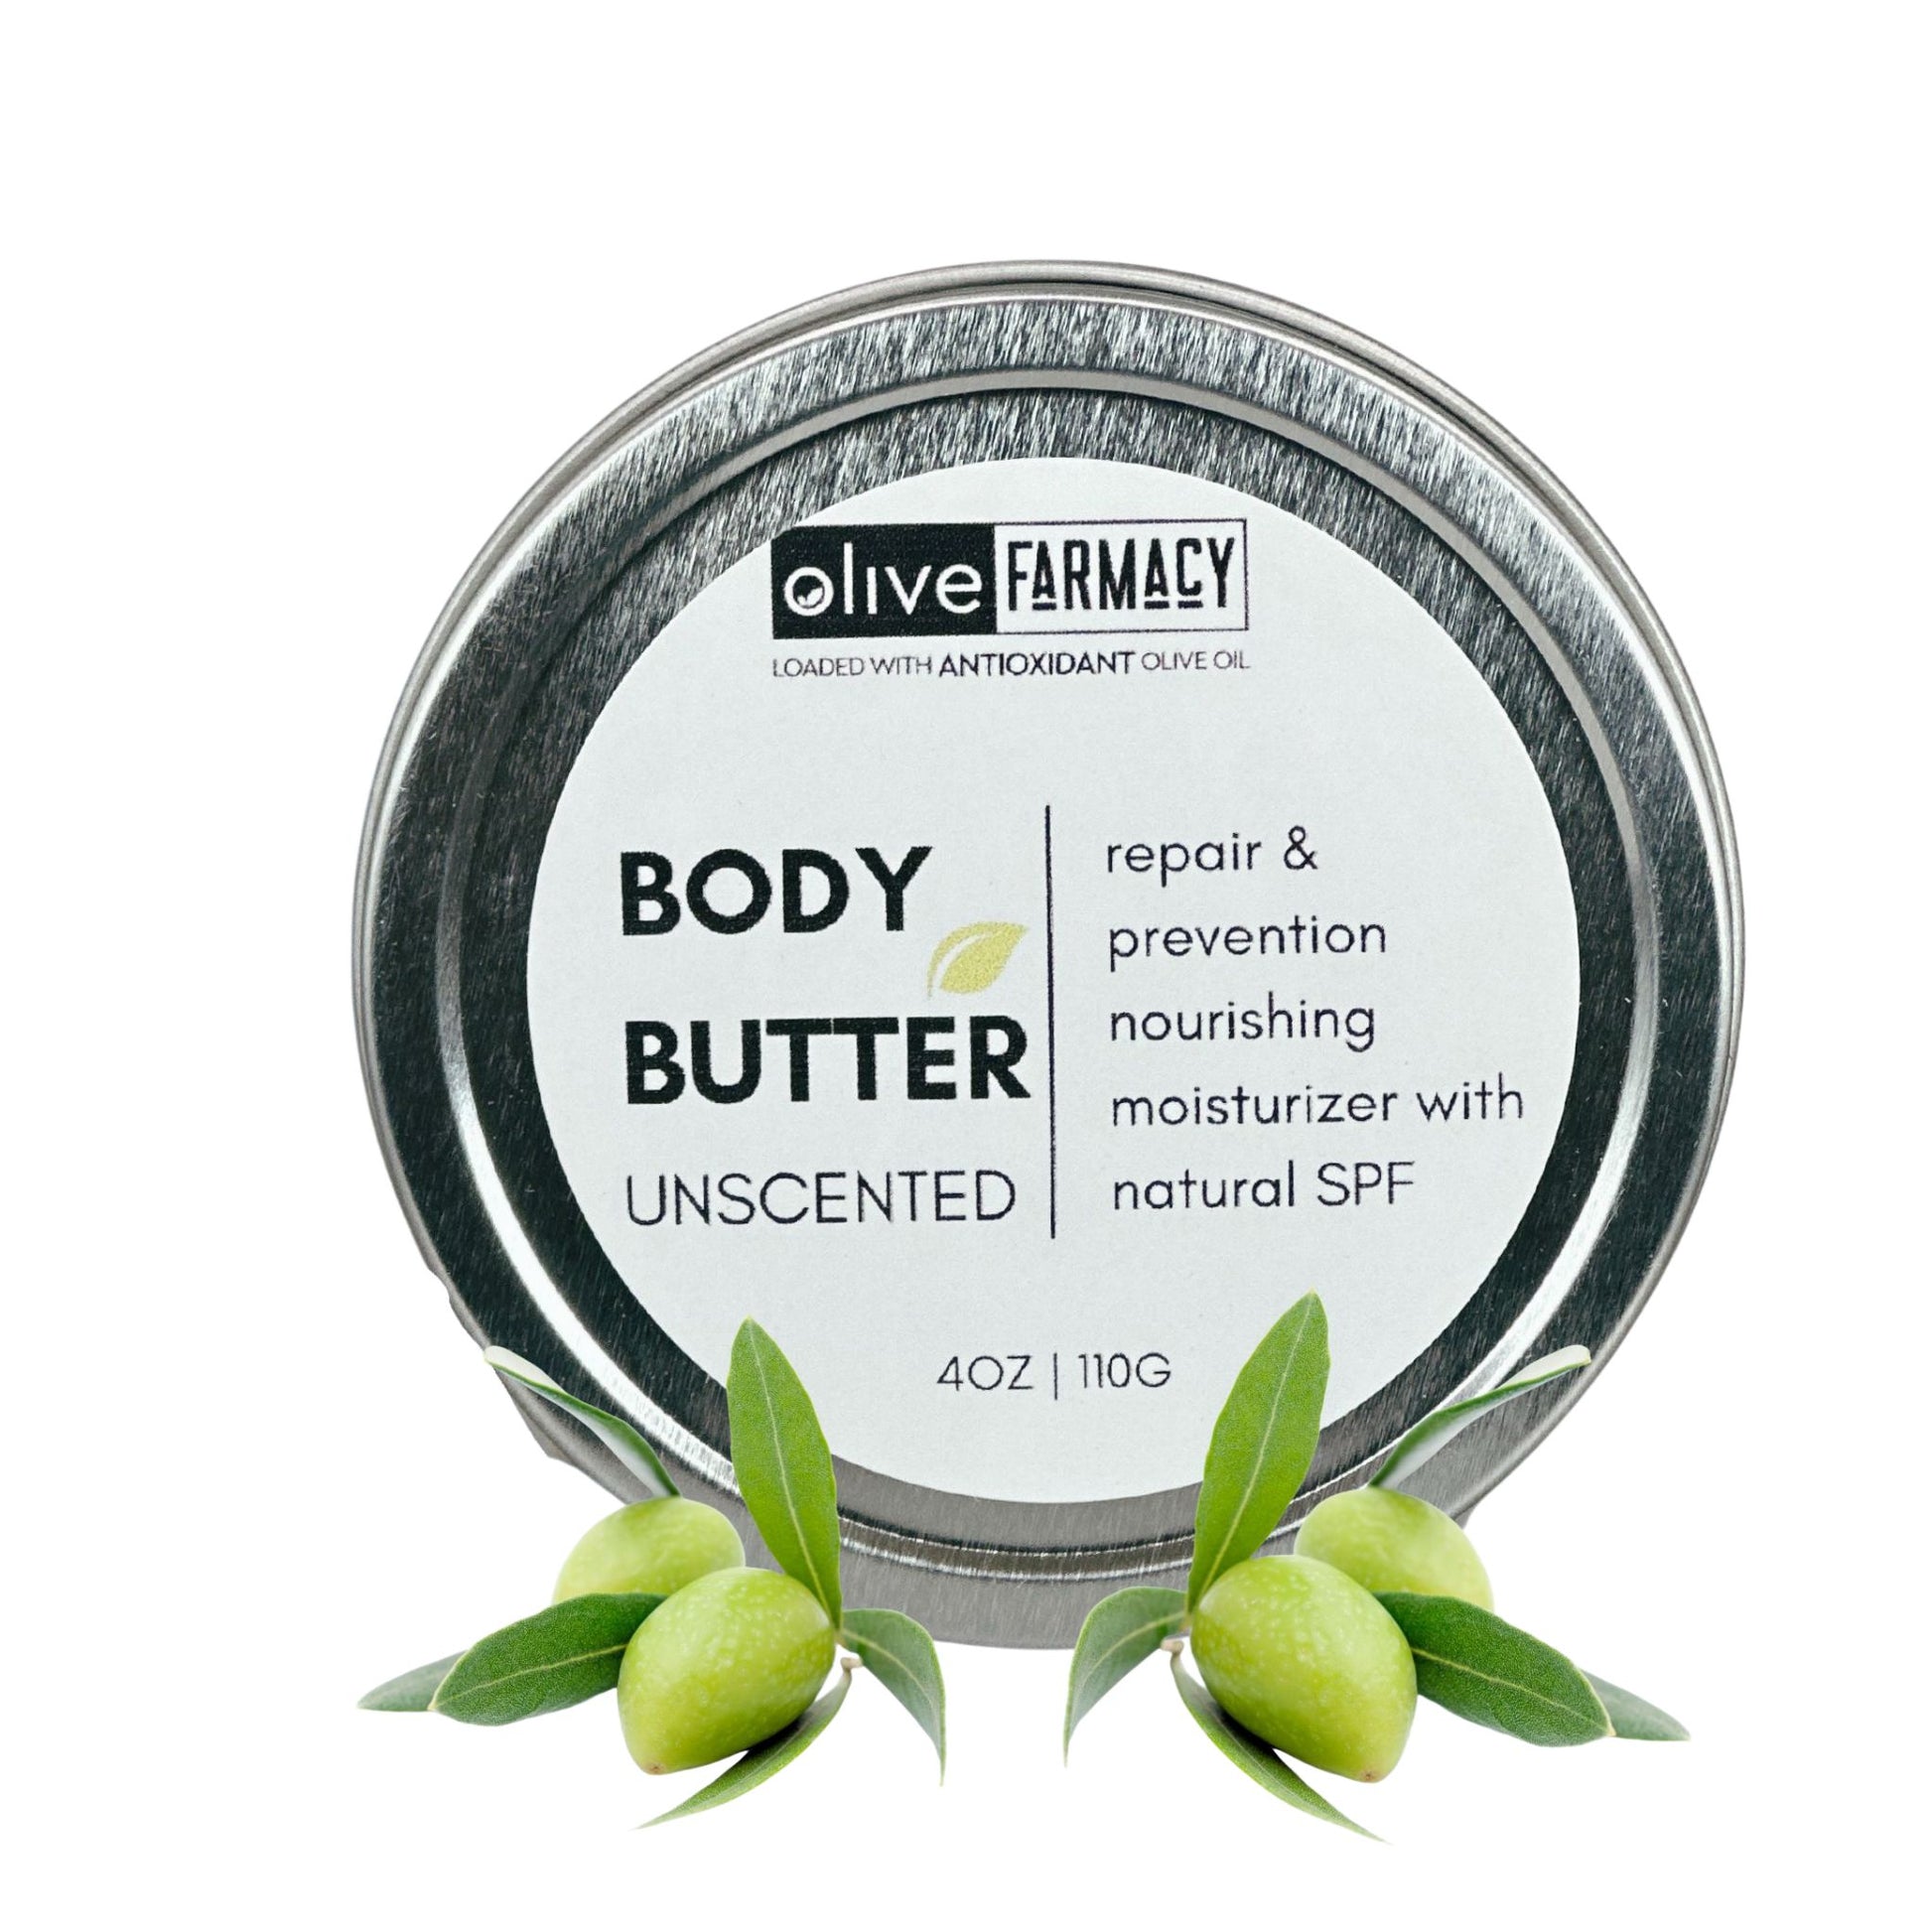 Unscented natural skincare body butter. Made with olive oil, kokum butter and shea butter.